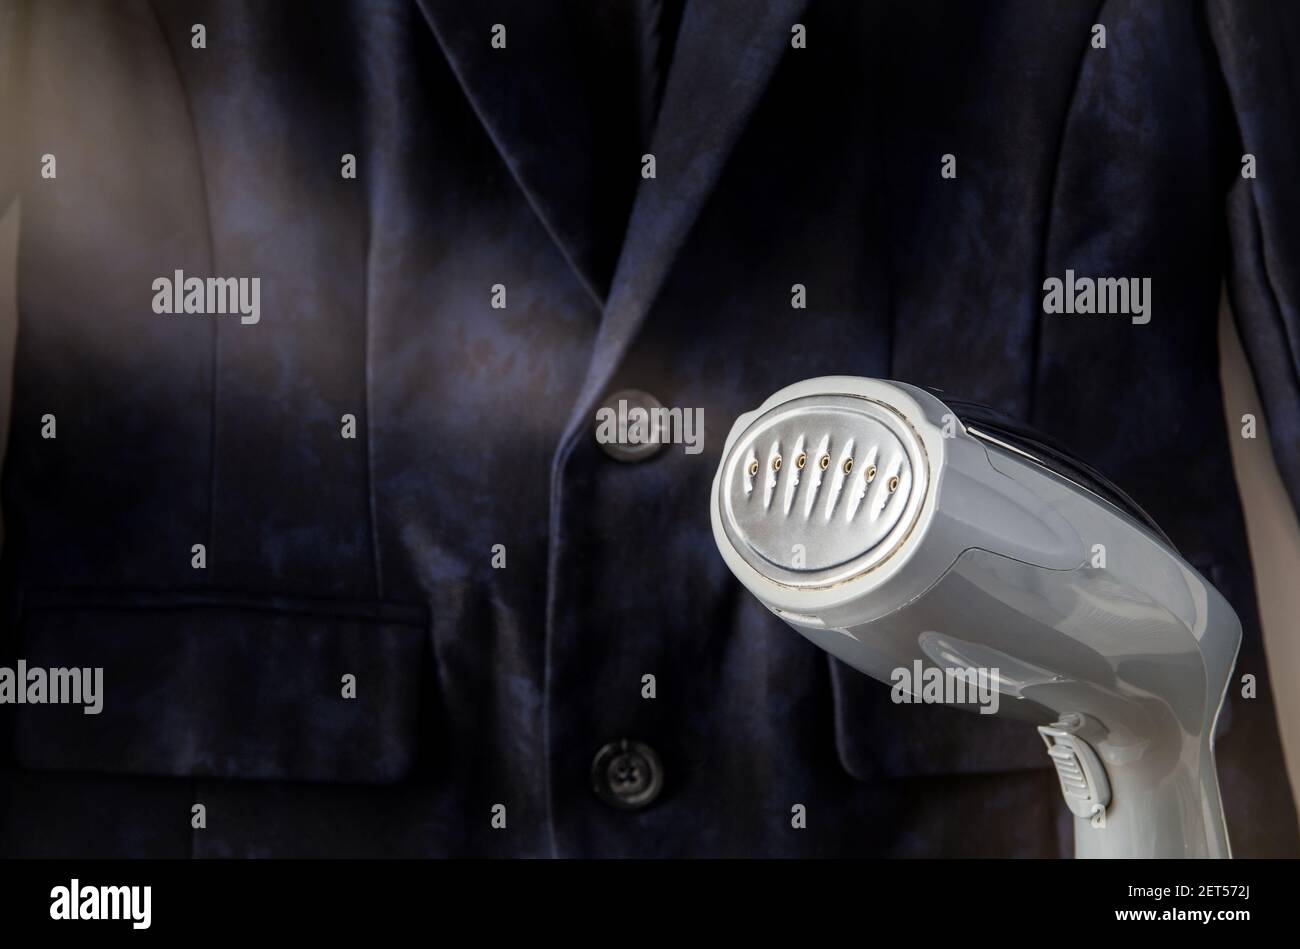 Close up view of small handheld fabric clothing steamer machine, hot steam coming, removing wrinkles. Stock Photo